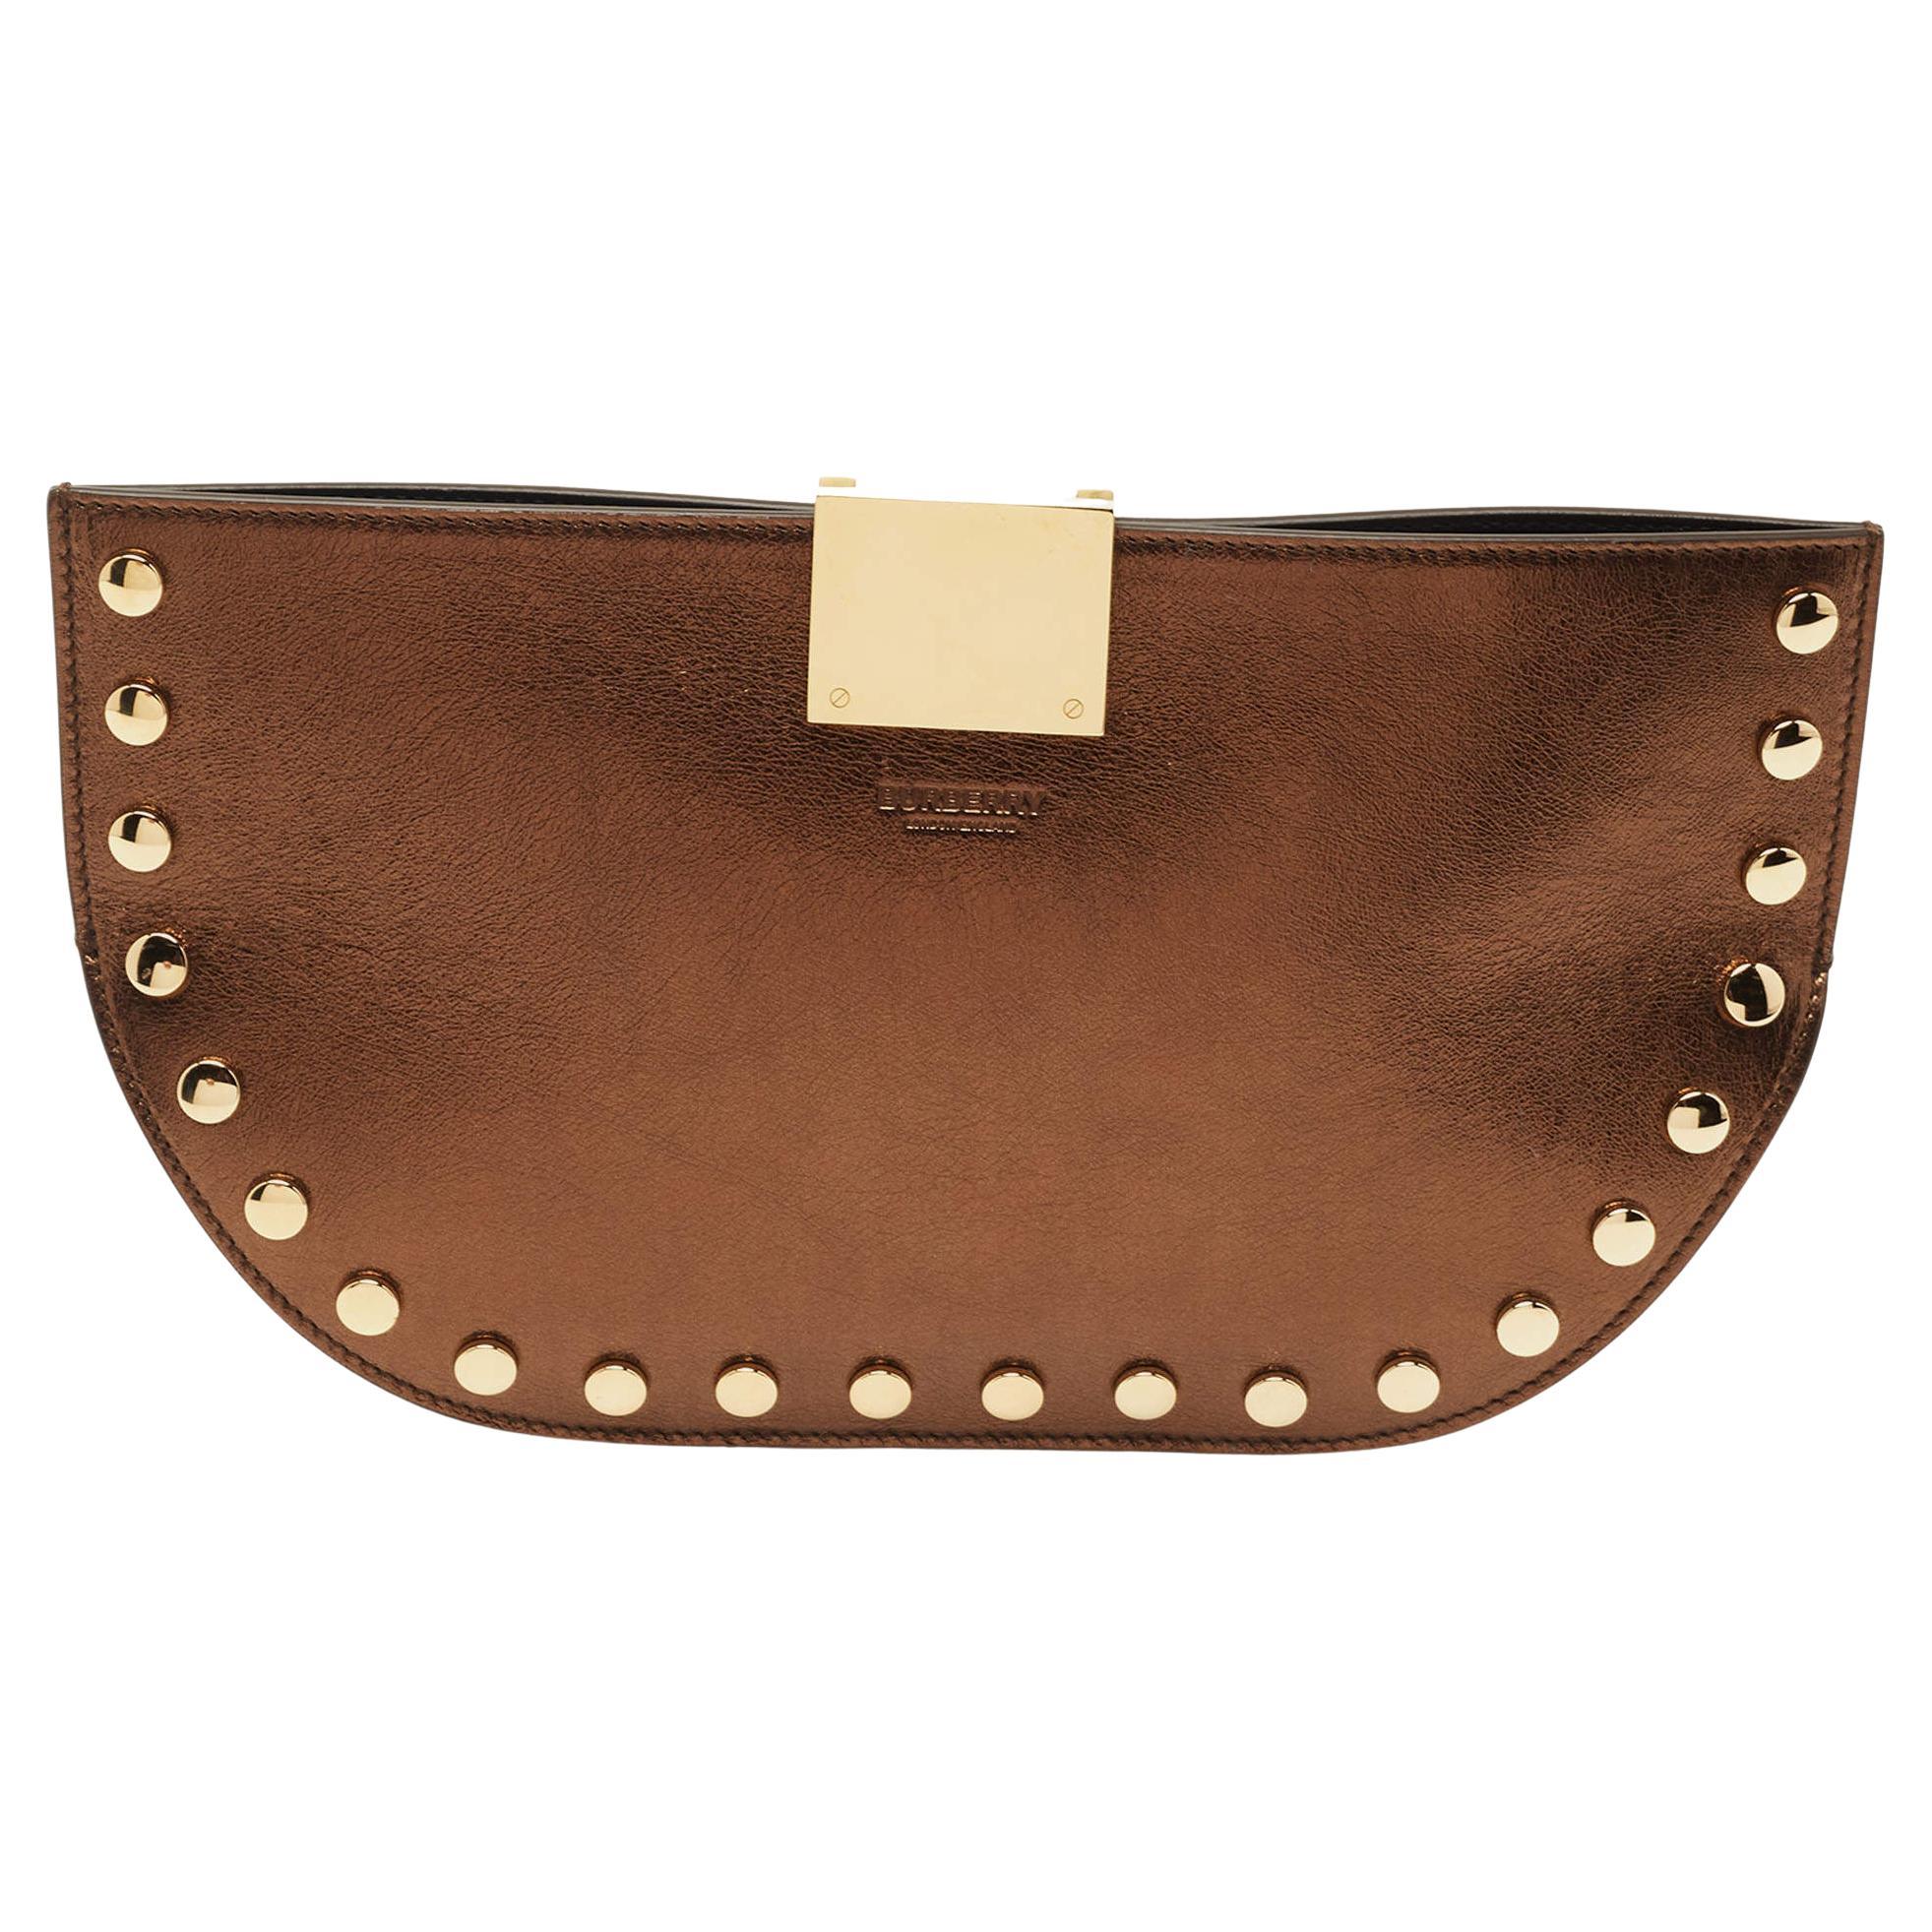 Burberry Bronze Studded Leather Olympia Clutch